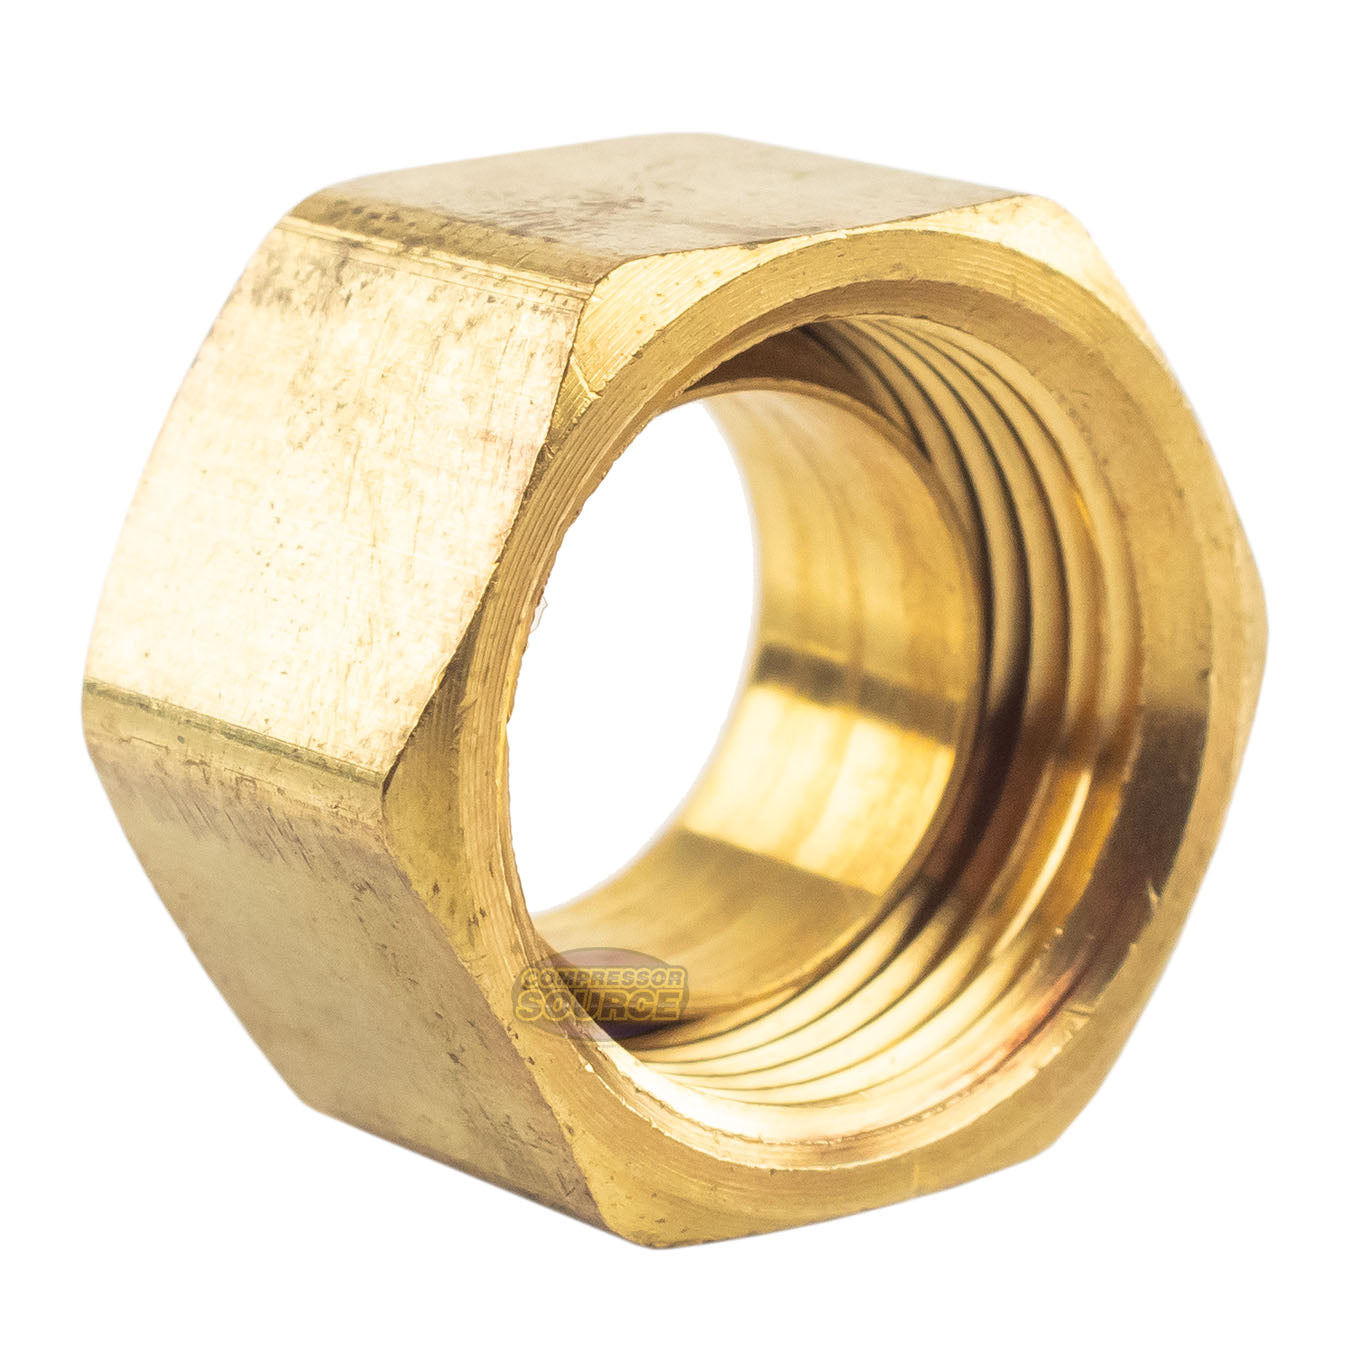 2 Pack 1/2" Compression Nut & Ferrule Combo for 1/2" OD Tube Brass Sleeve Nut